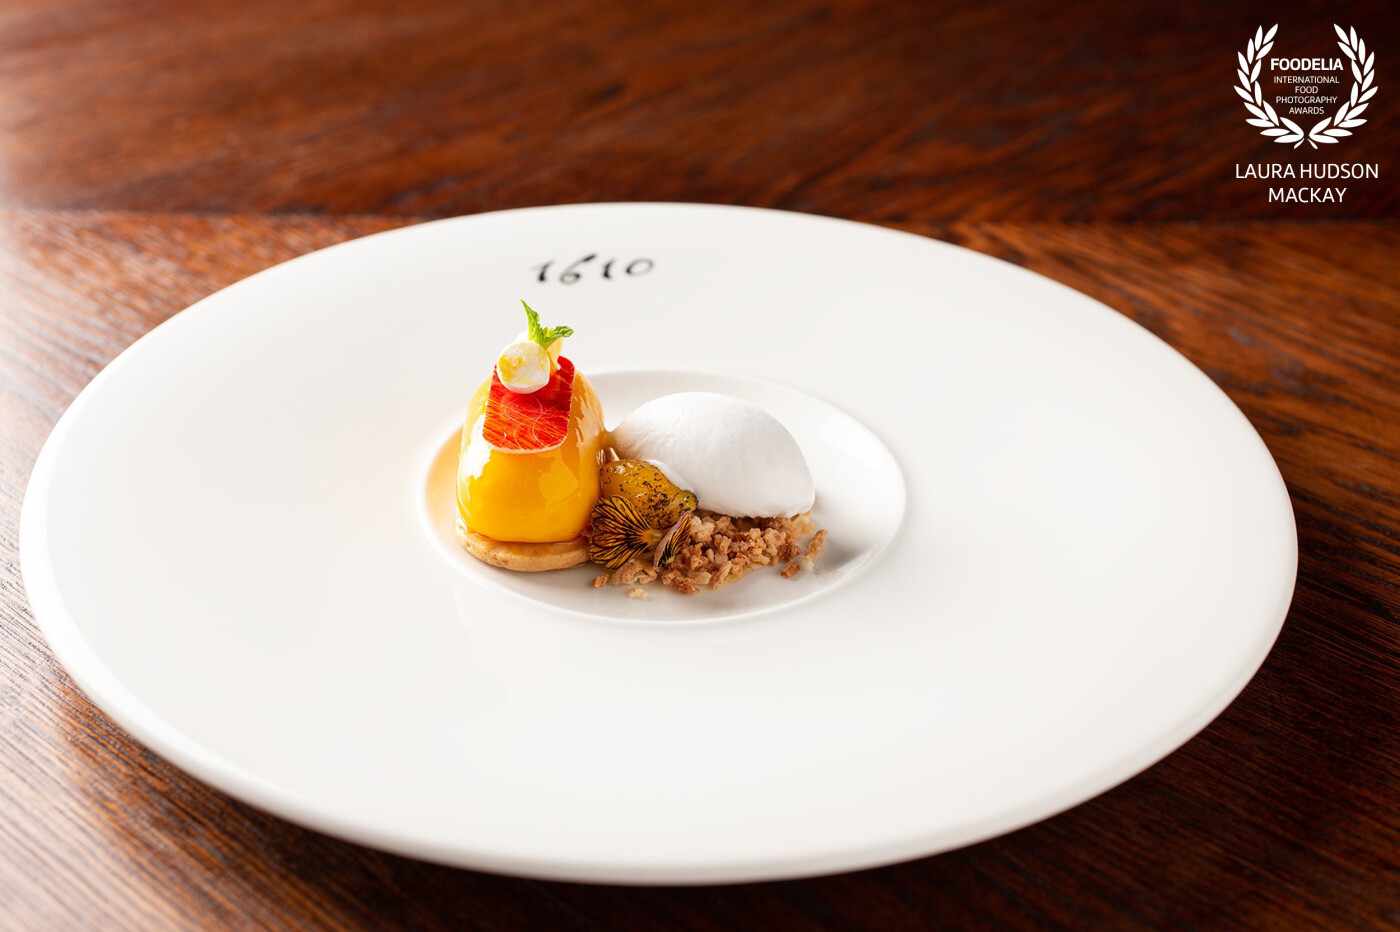 Such a delight to photograph for the Globe Inn, Dumfries, South West Scotland. An exquisite dish of Mango Cremeux and coconut sorbet.